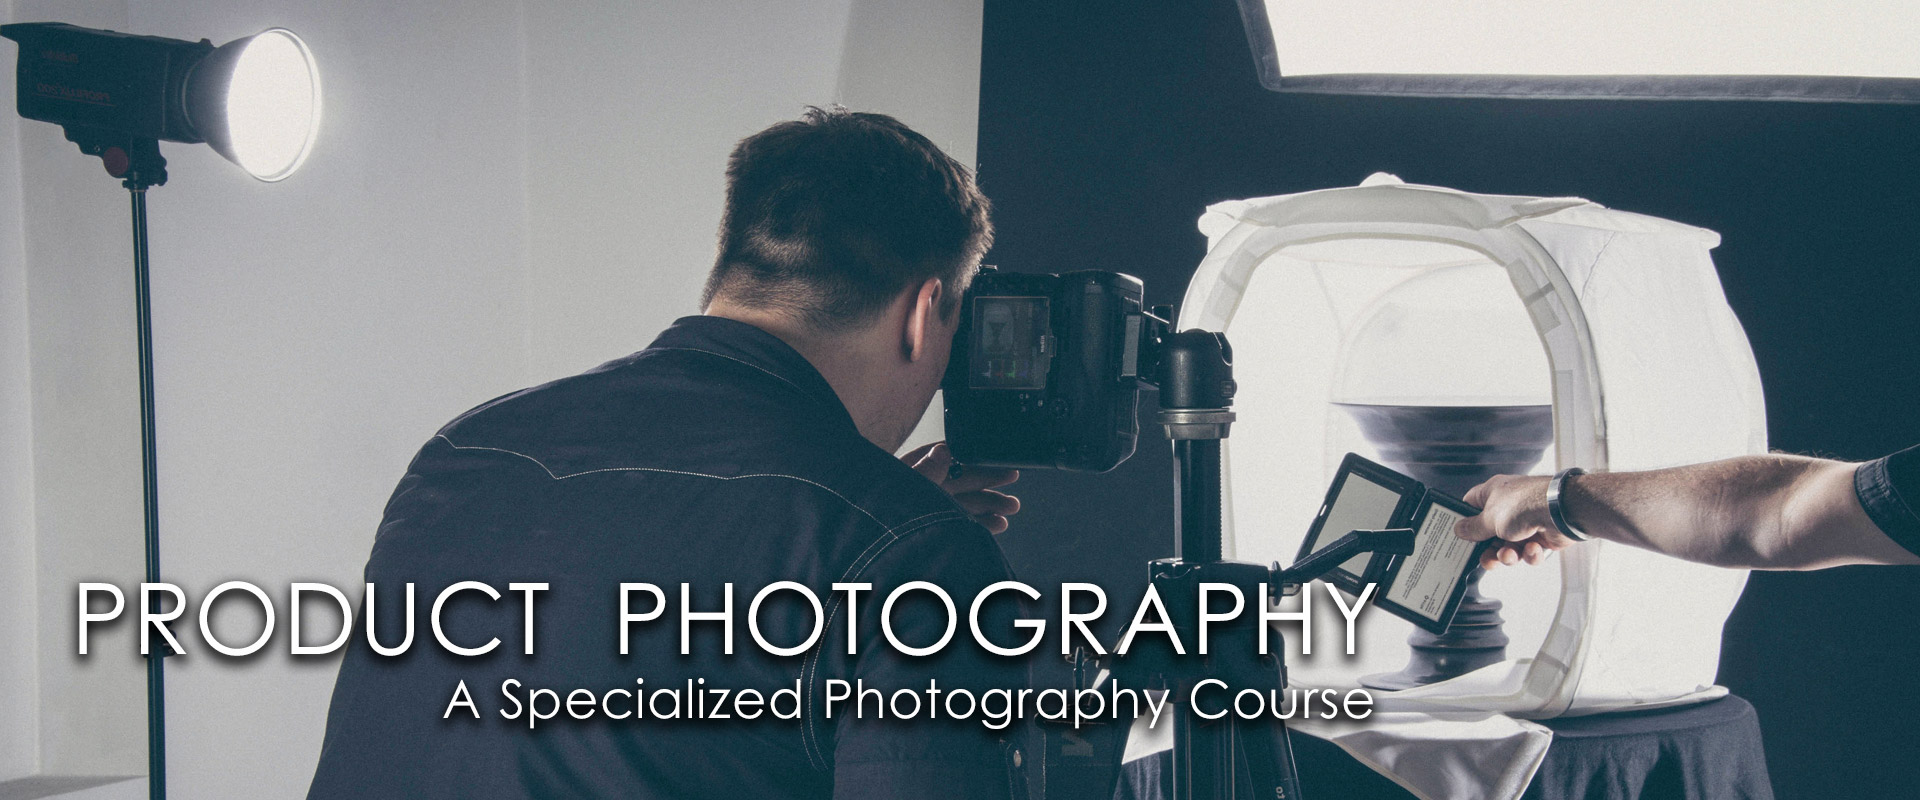 product-photography-course-in-jordan-titles